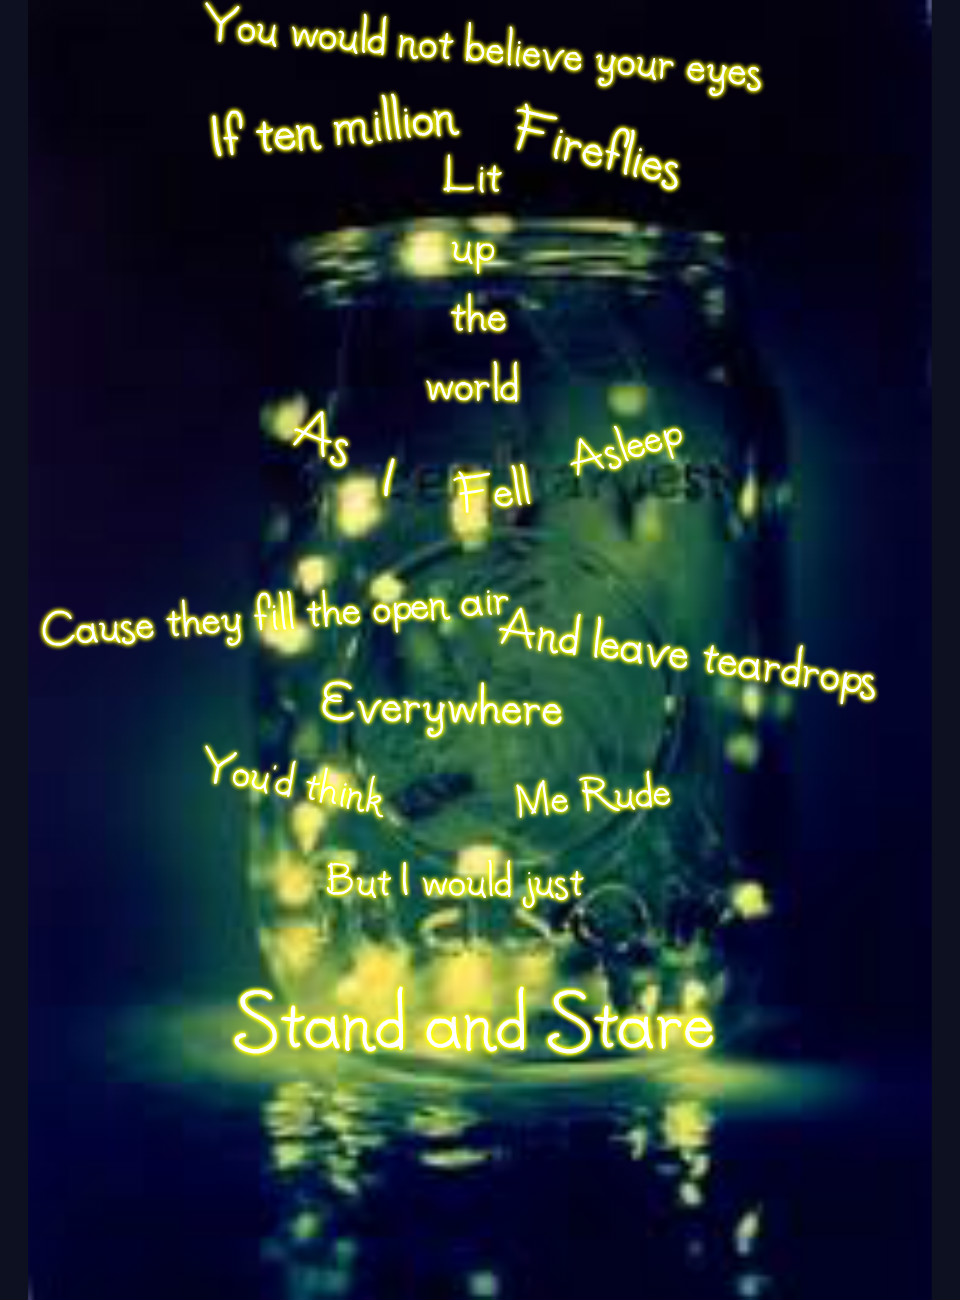 Quotes About Fireflies. QuotesGram